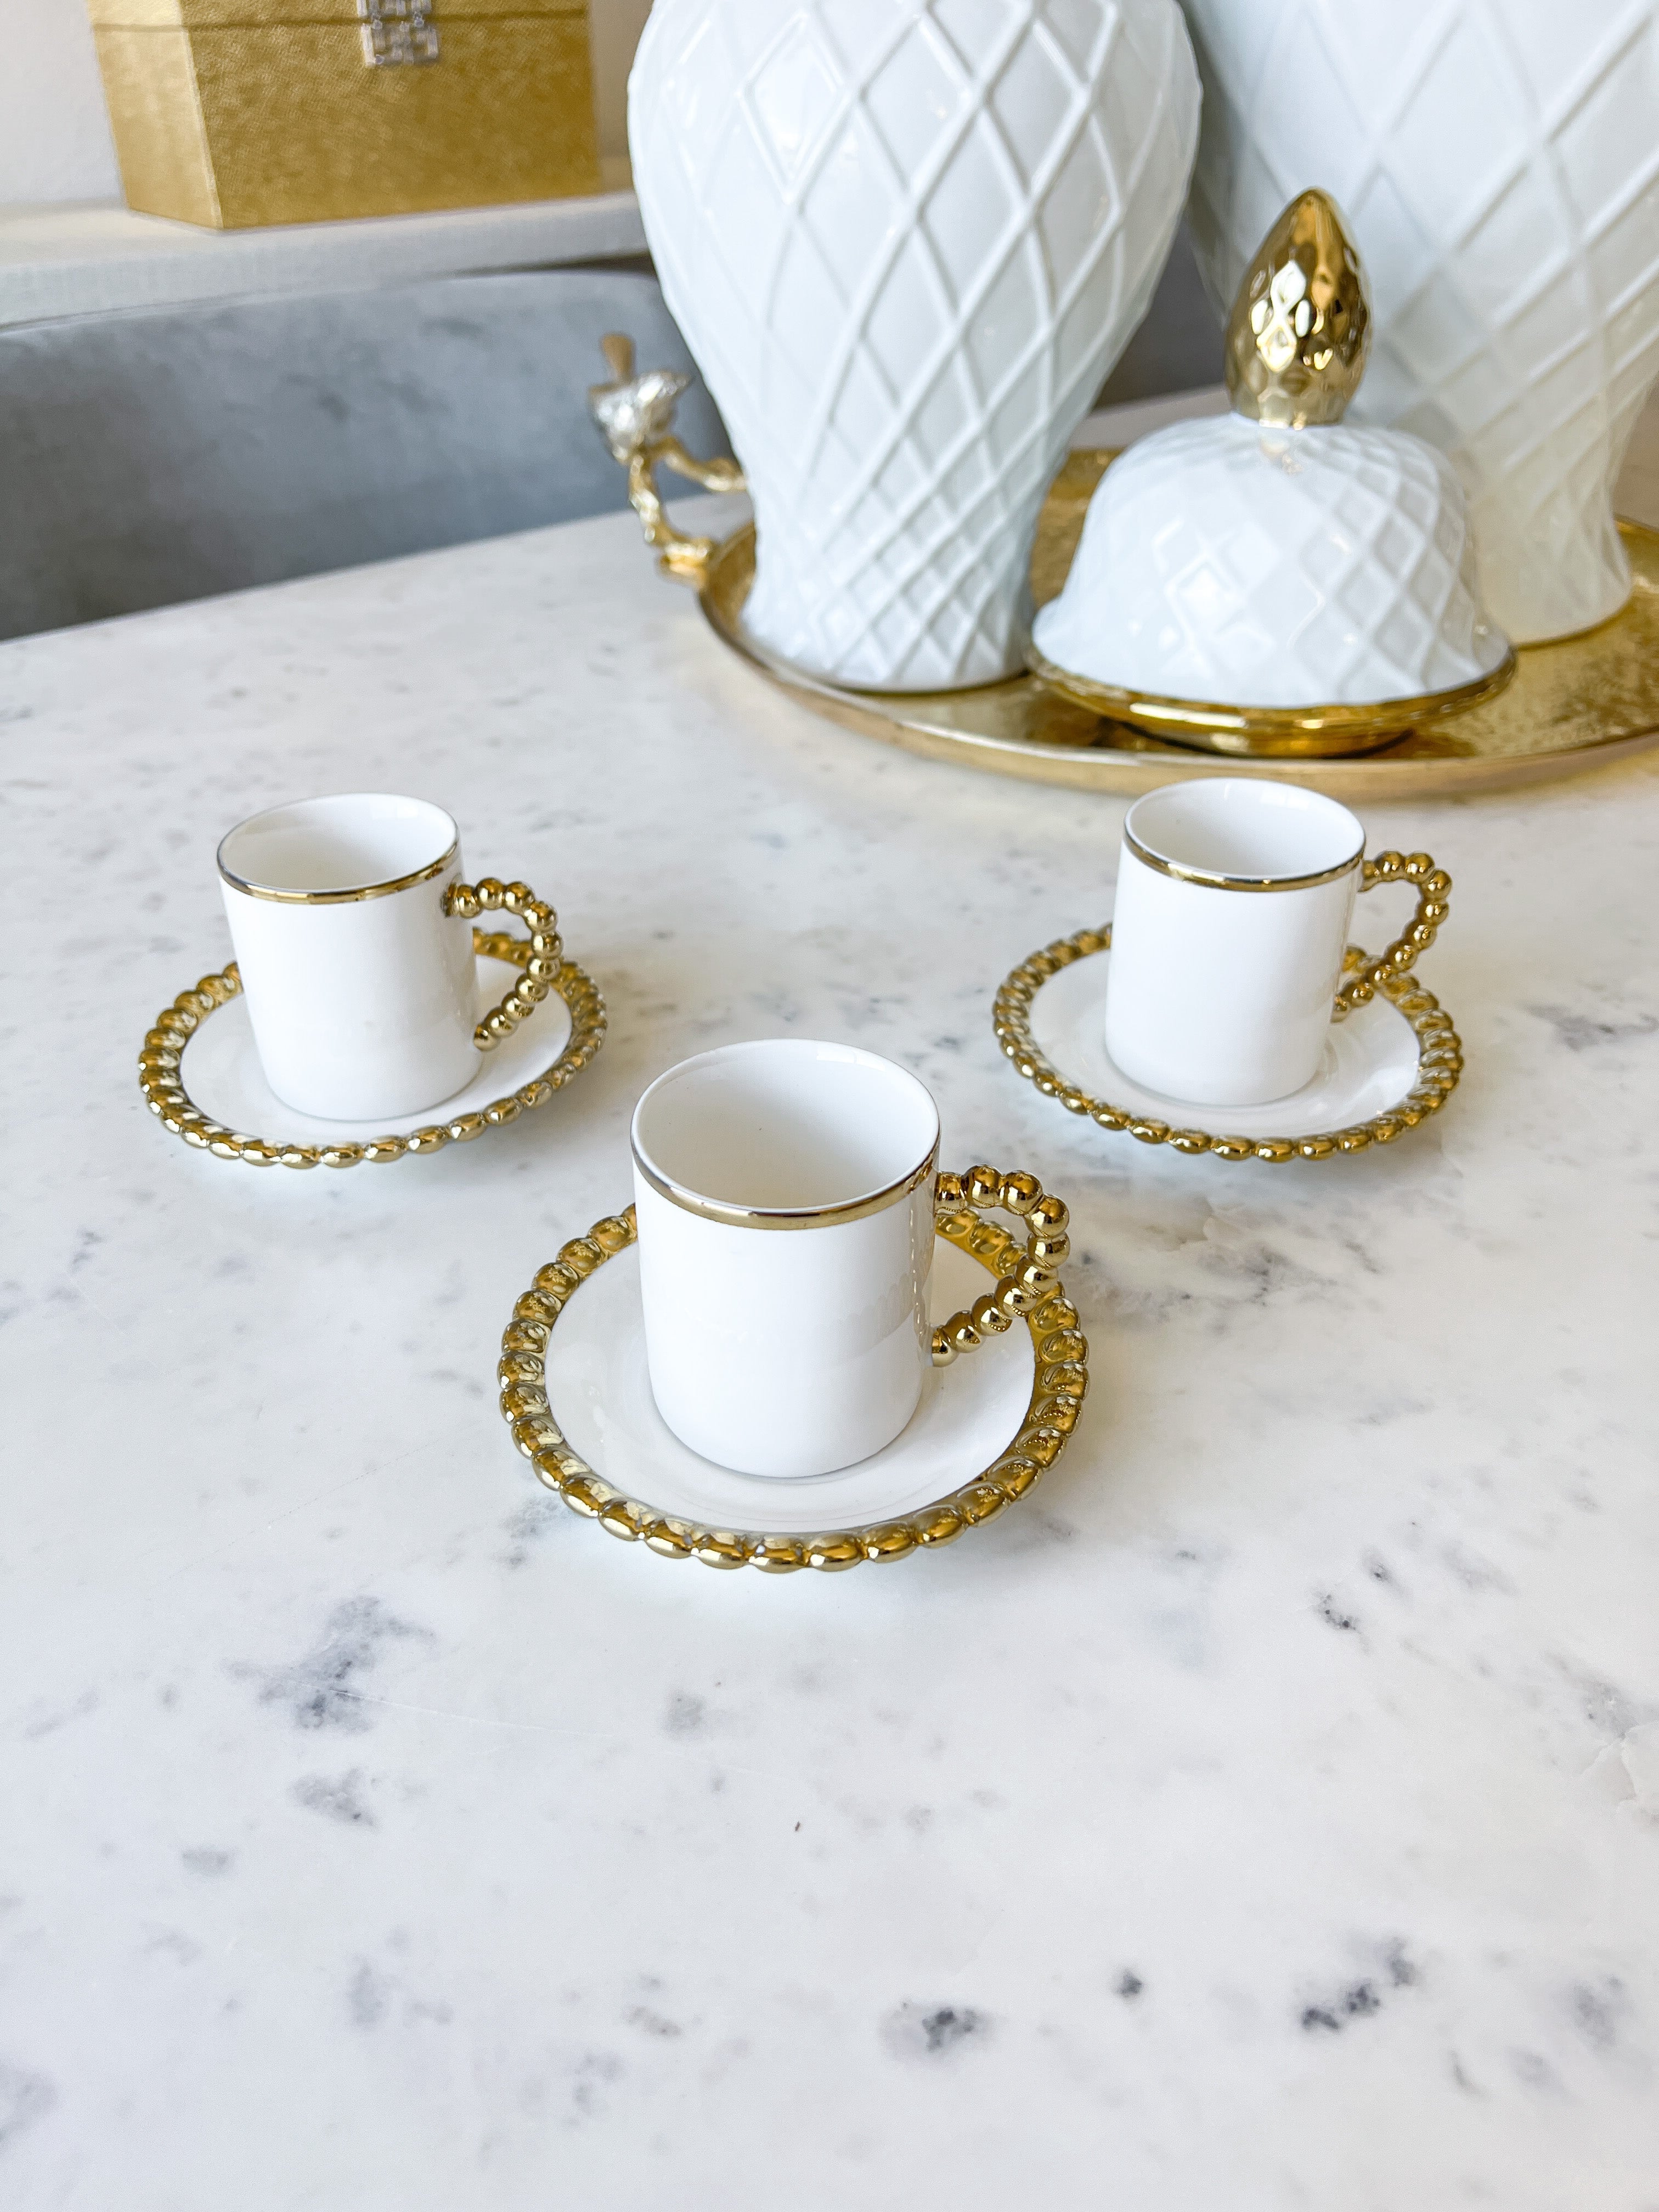 Gold Beaded Espresso Cups with Saucer (Set of 6) - HTS HOME DECOR